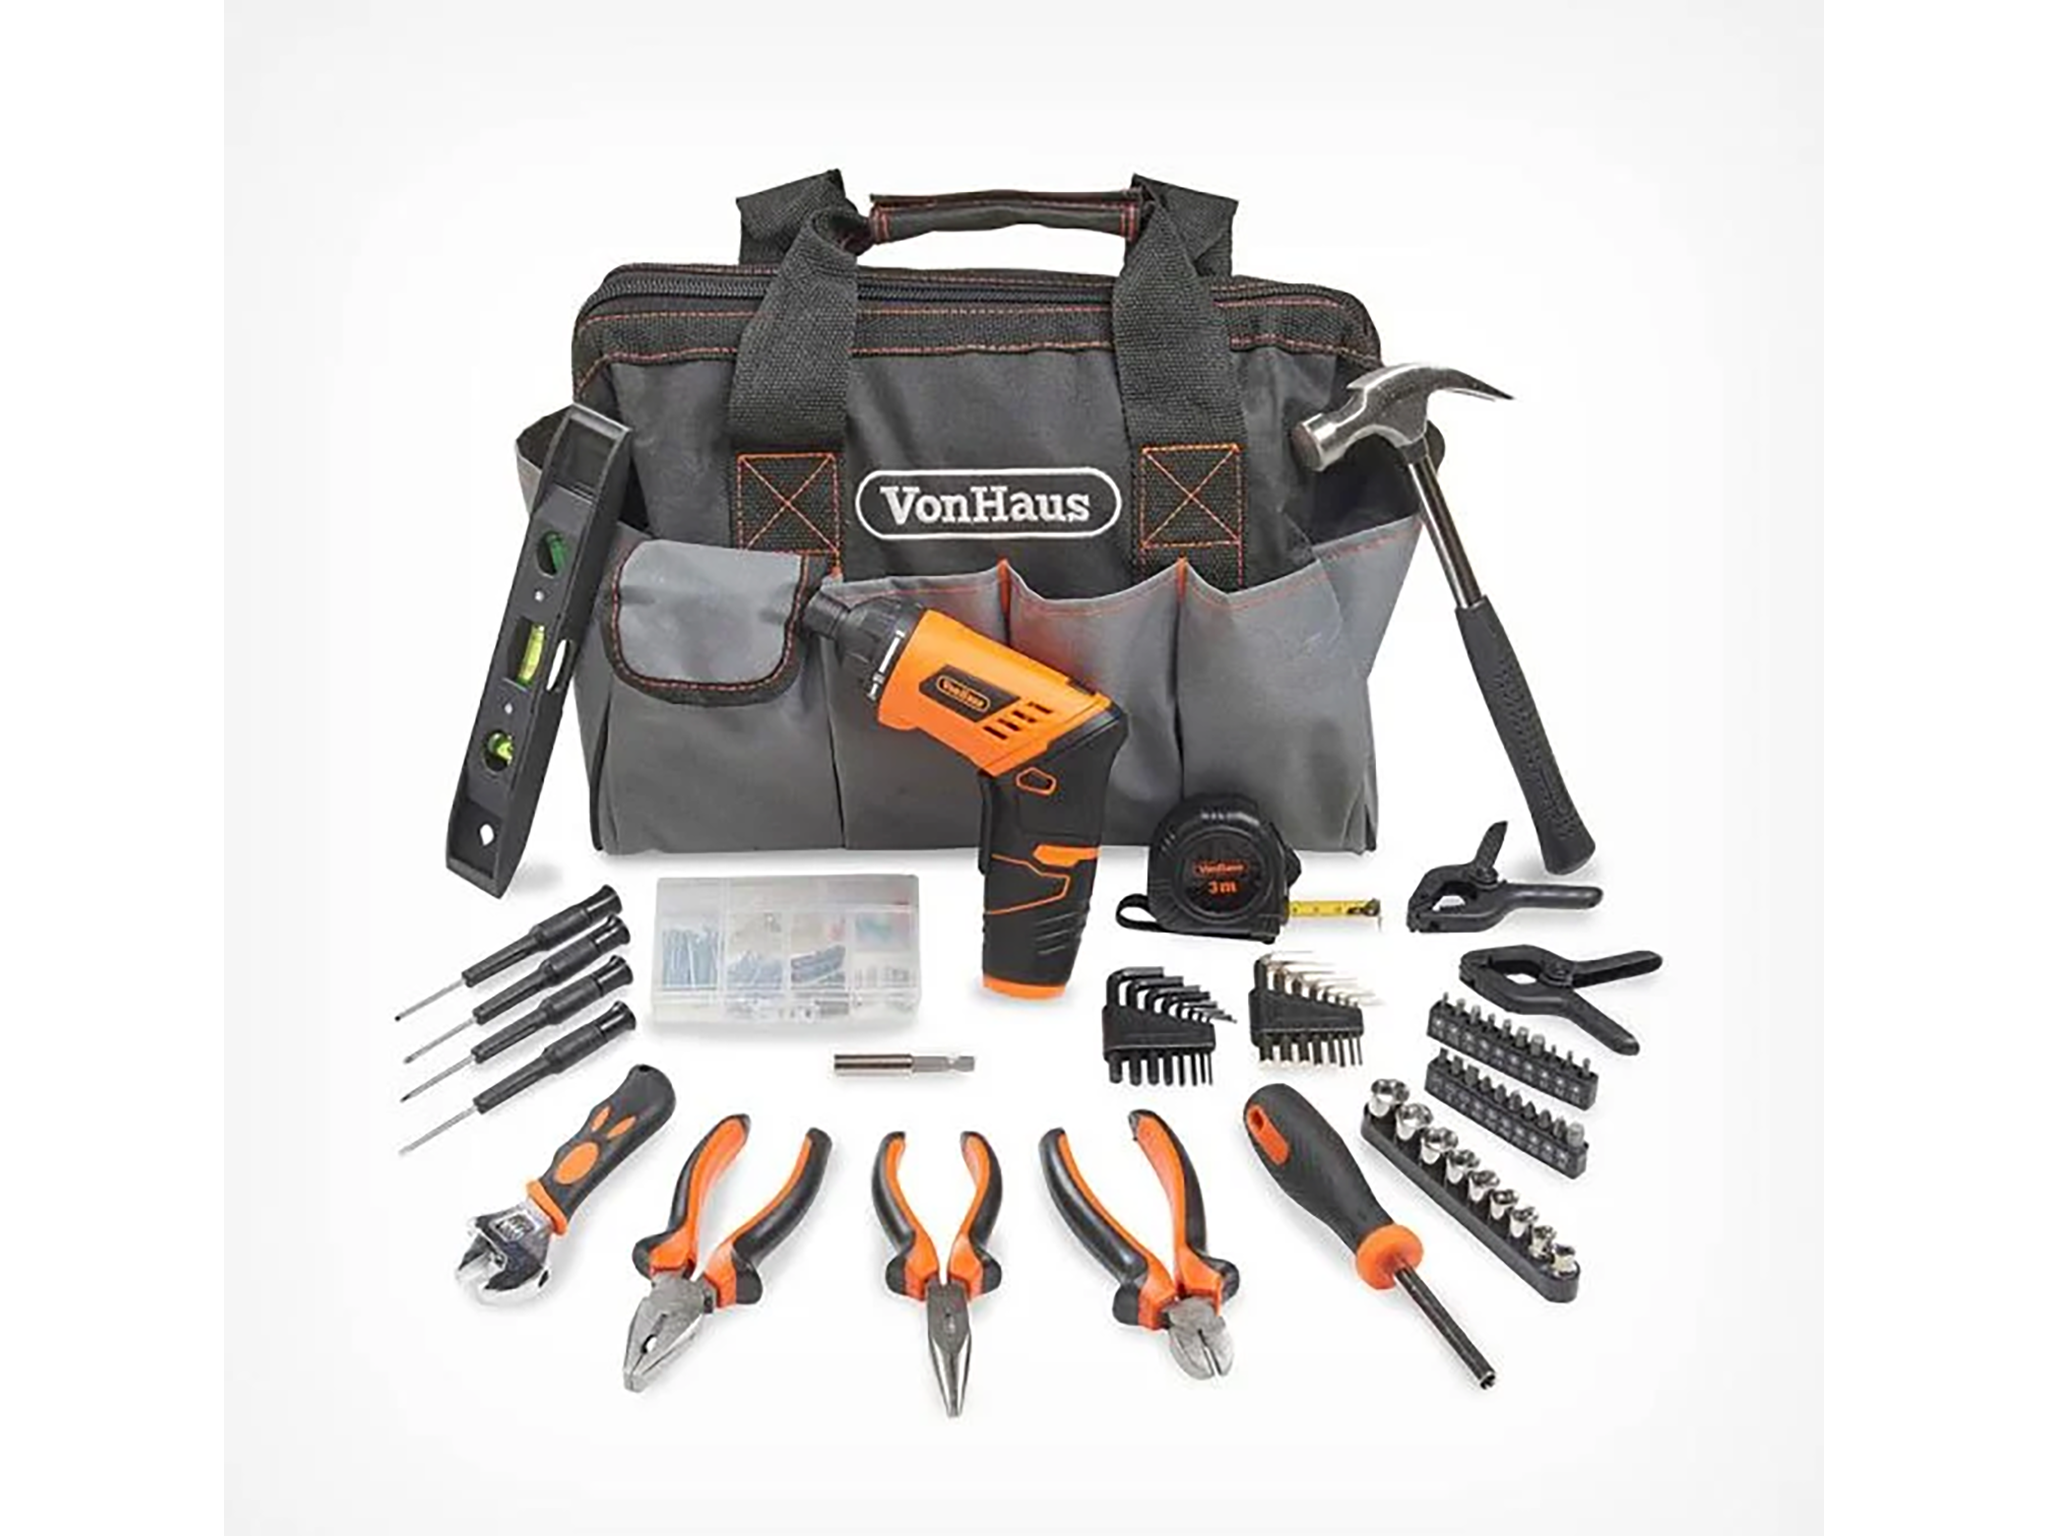 VonHaus 94-piece household tool and screwdriver combo kit